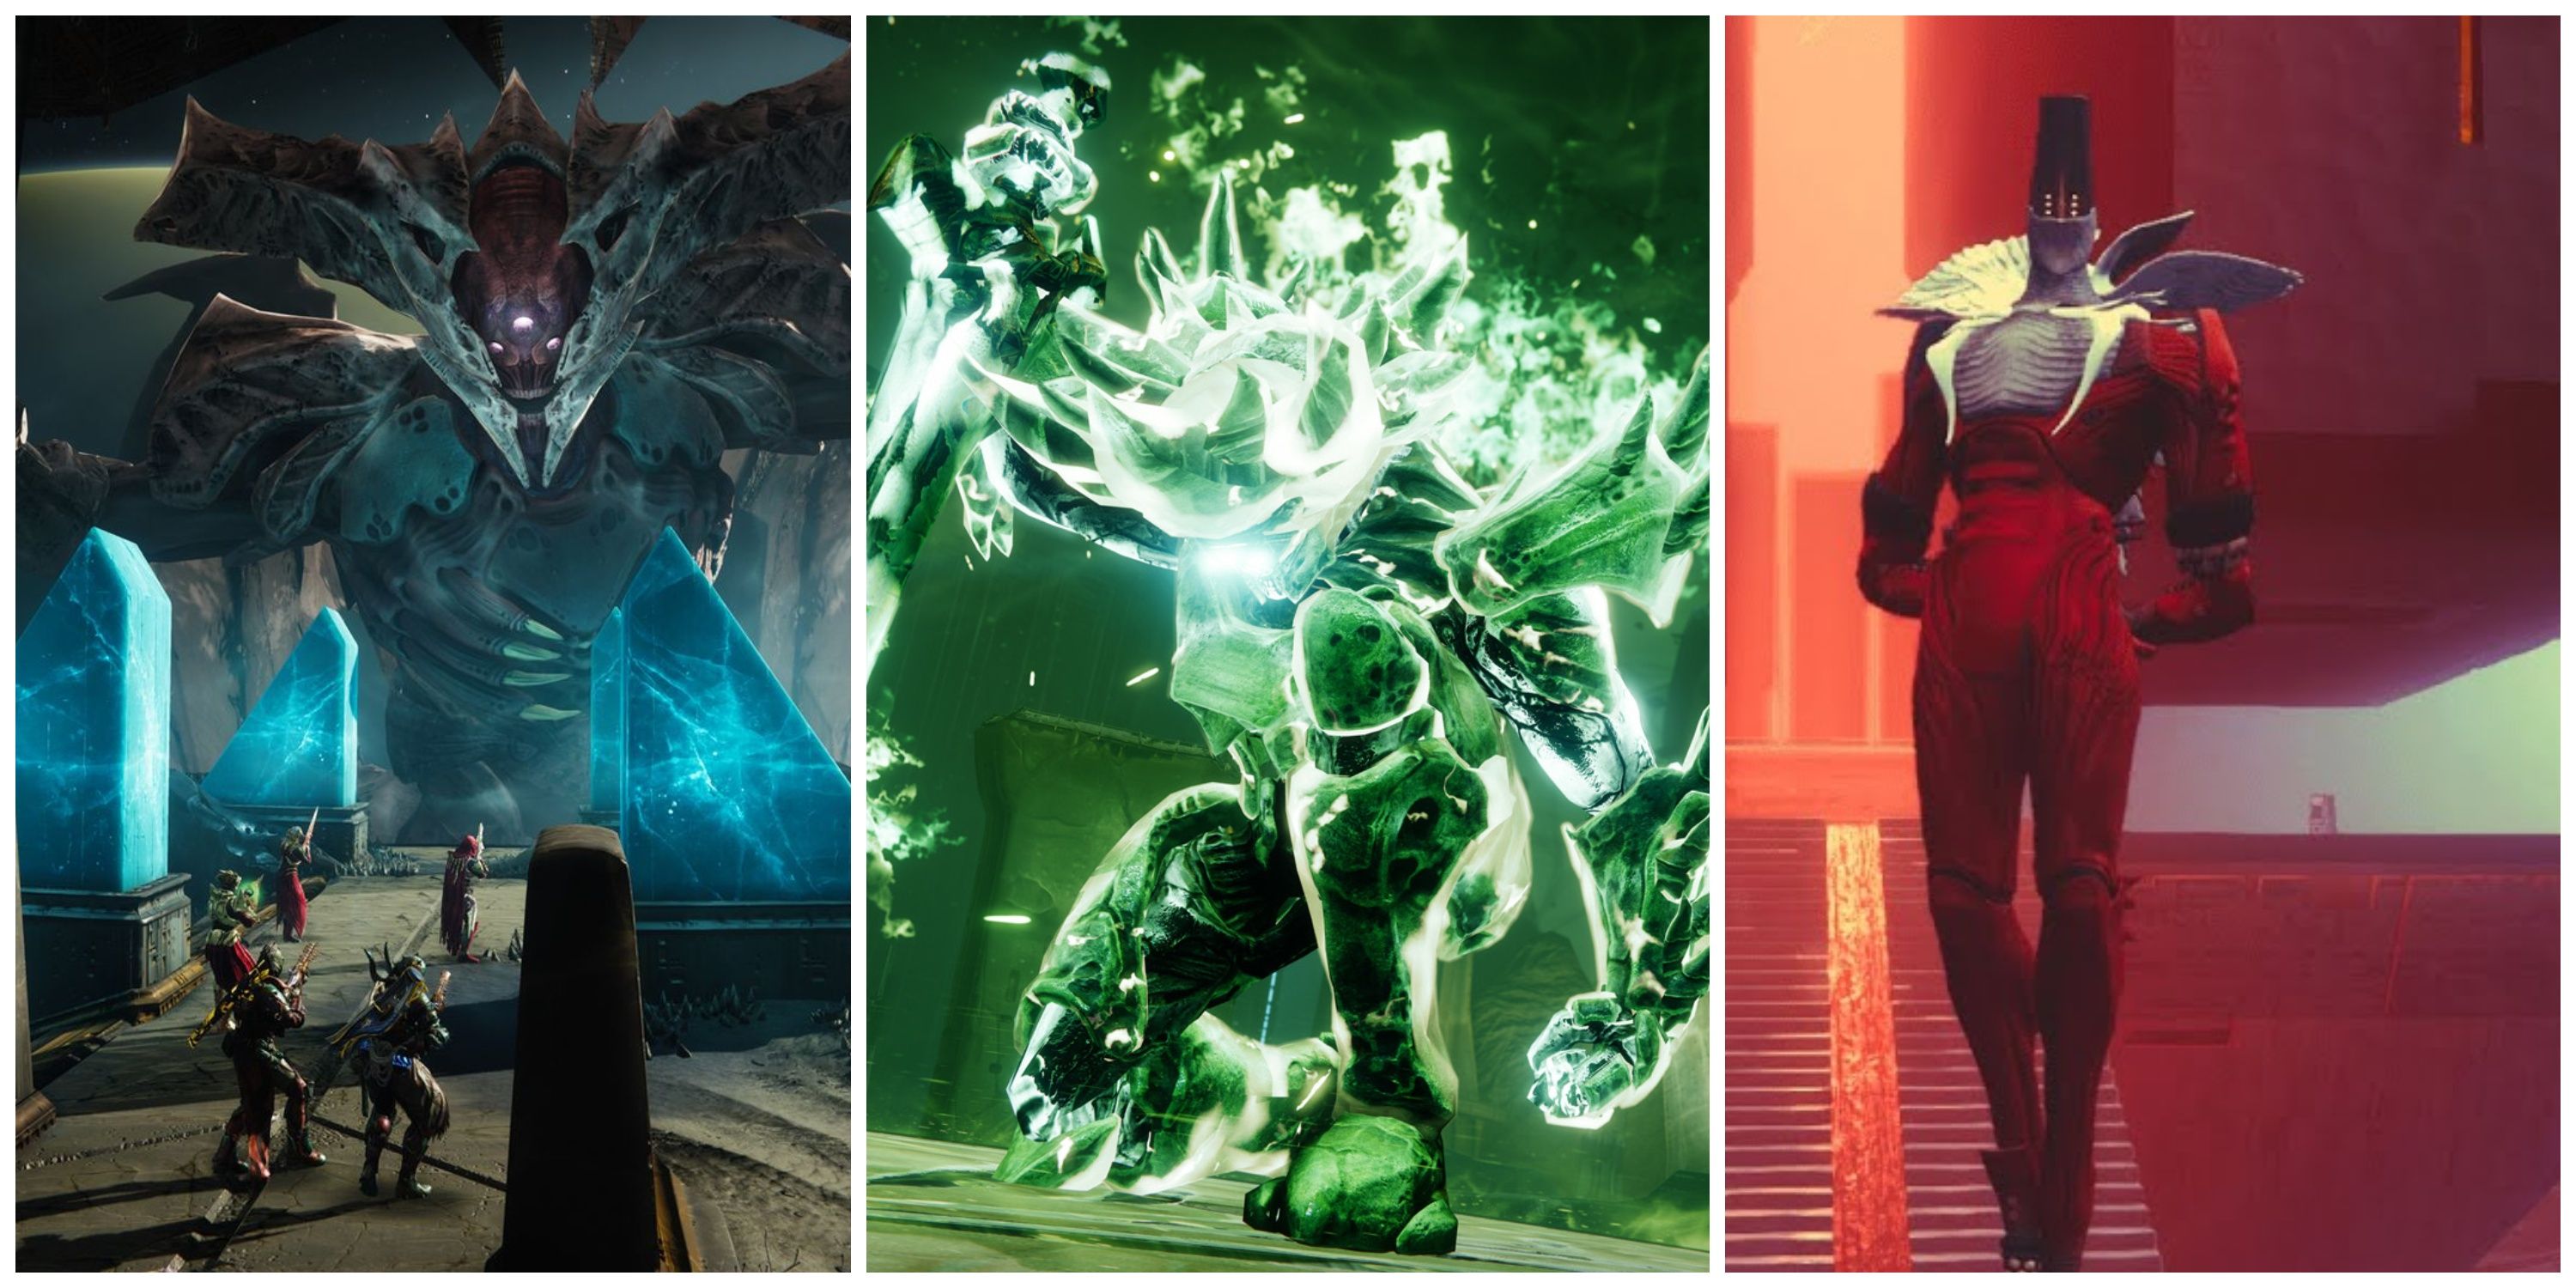 oryx the taken king, crota the son of oryx, rhulk the disciple of the witness from destiny 2